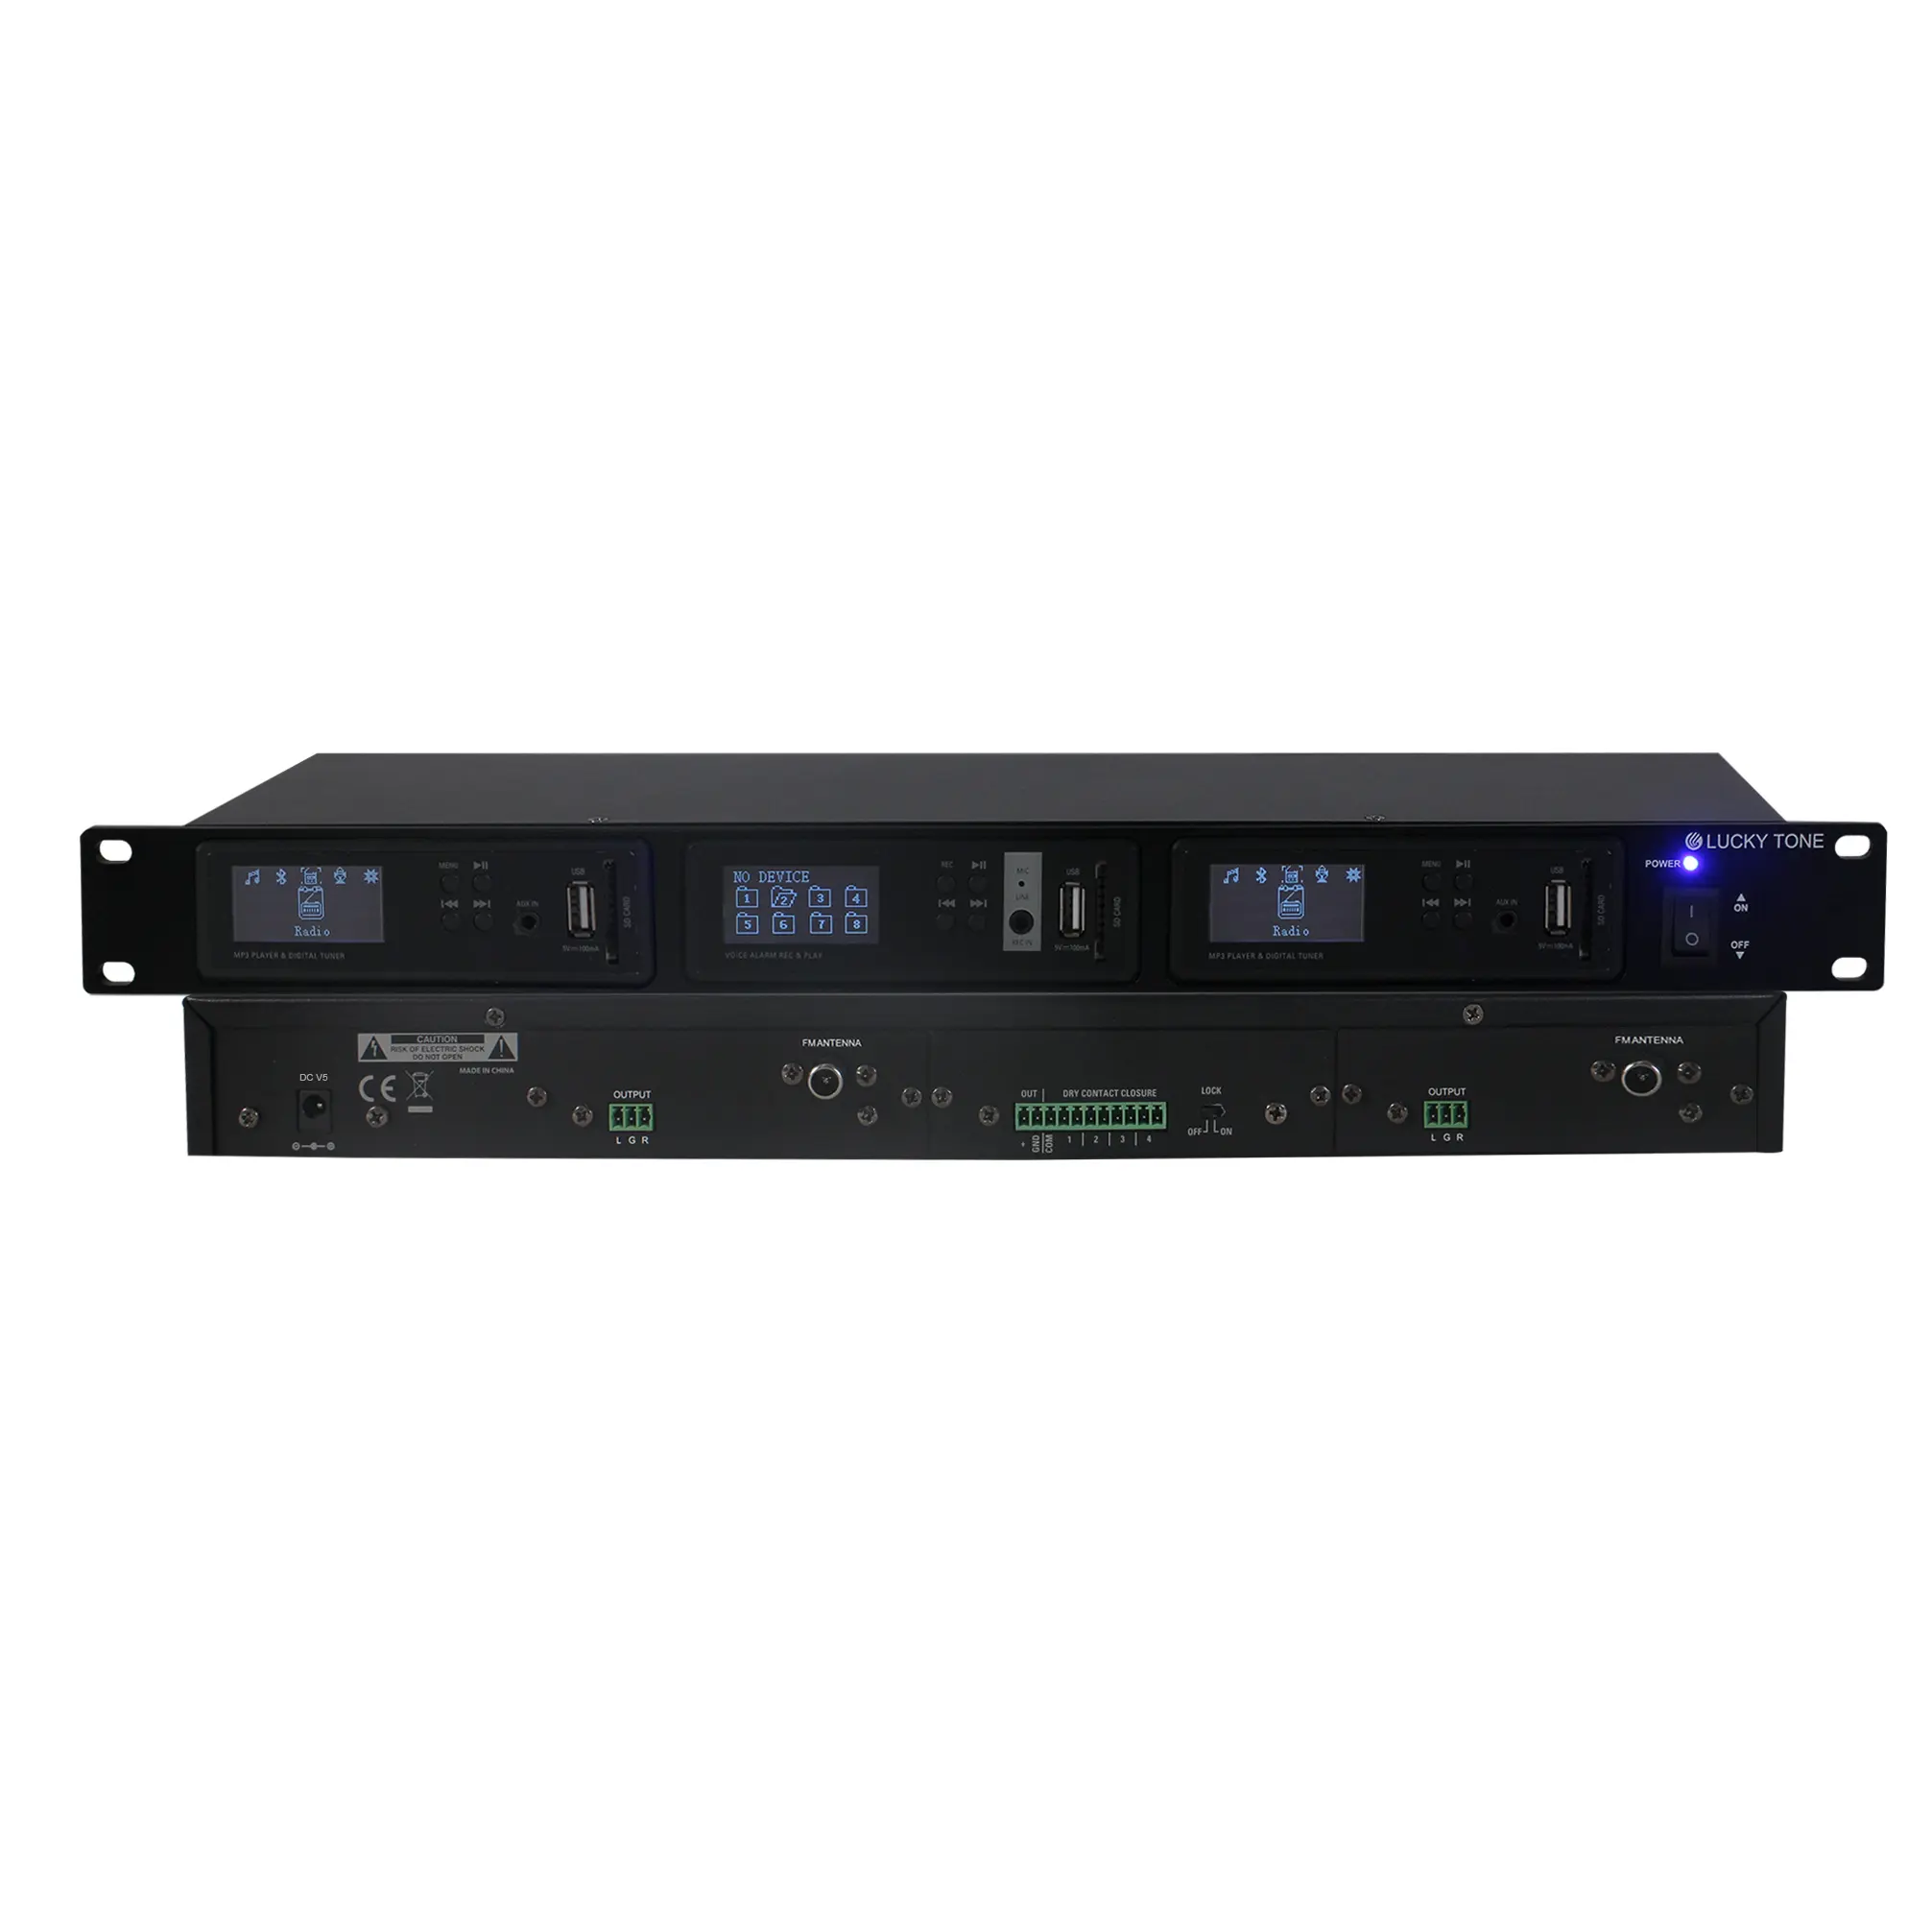 1U 19 Inch Rack Mount Deck for Up to 3 Mplayers Media Player